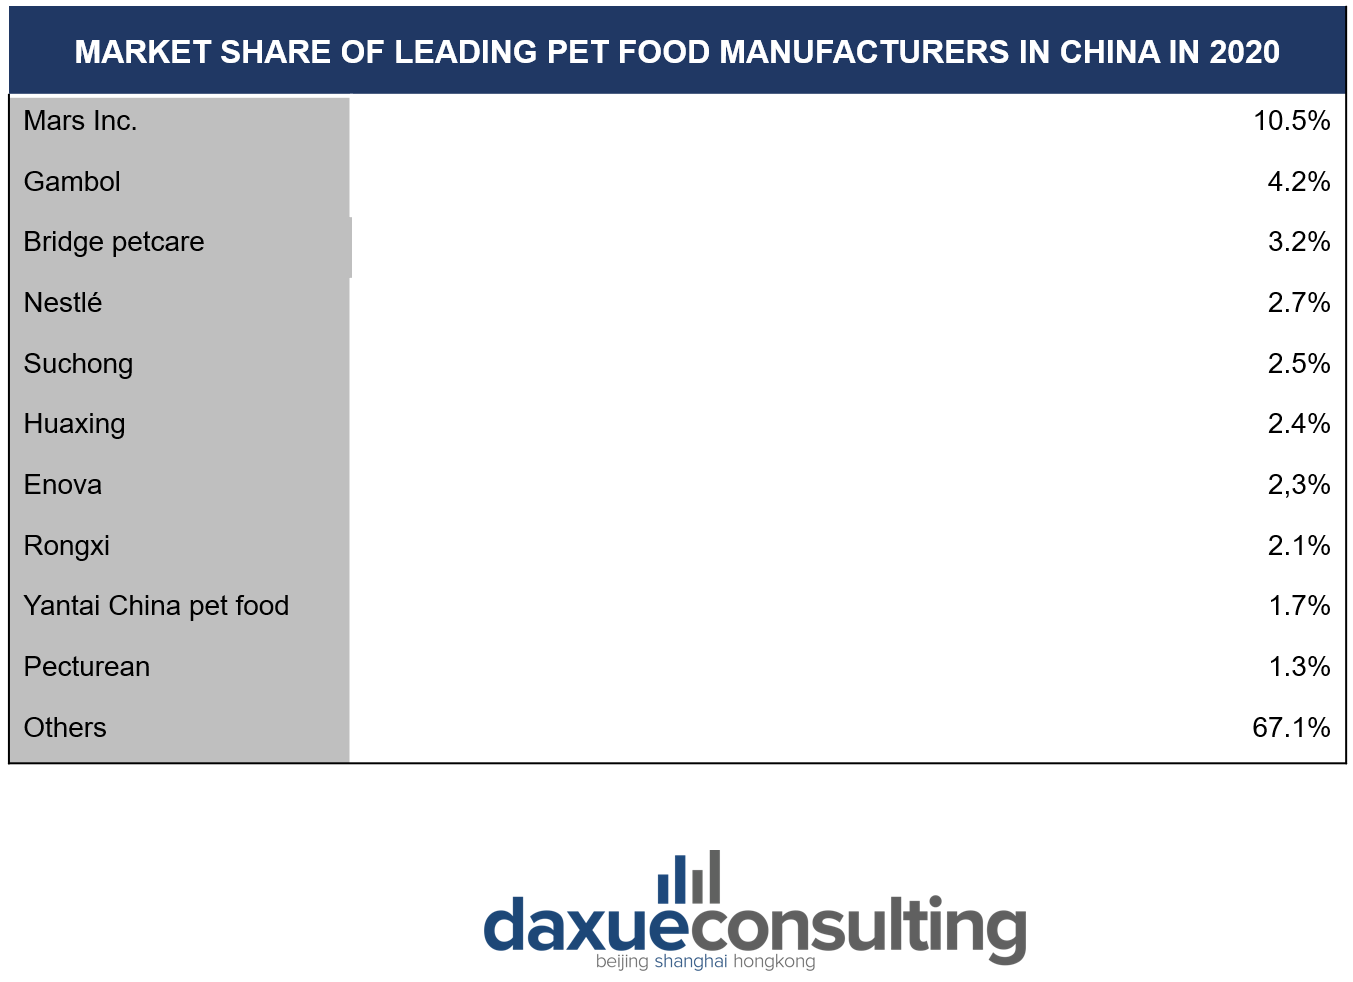 Leading players in China's pet food market